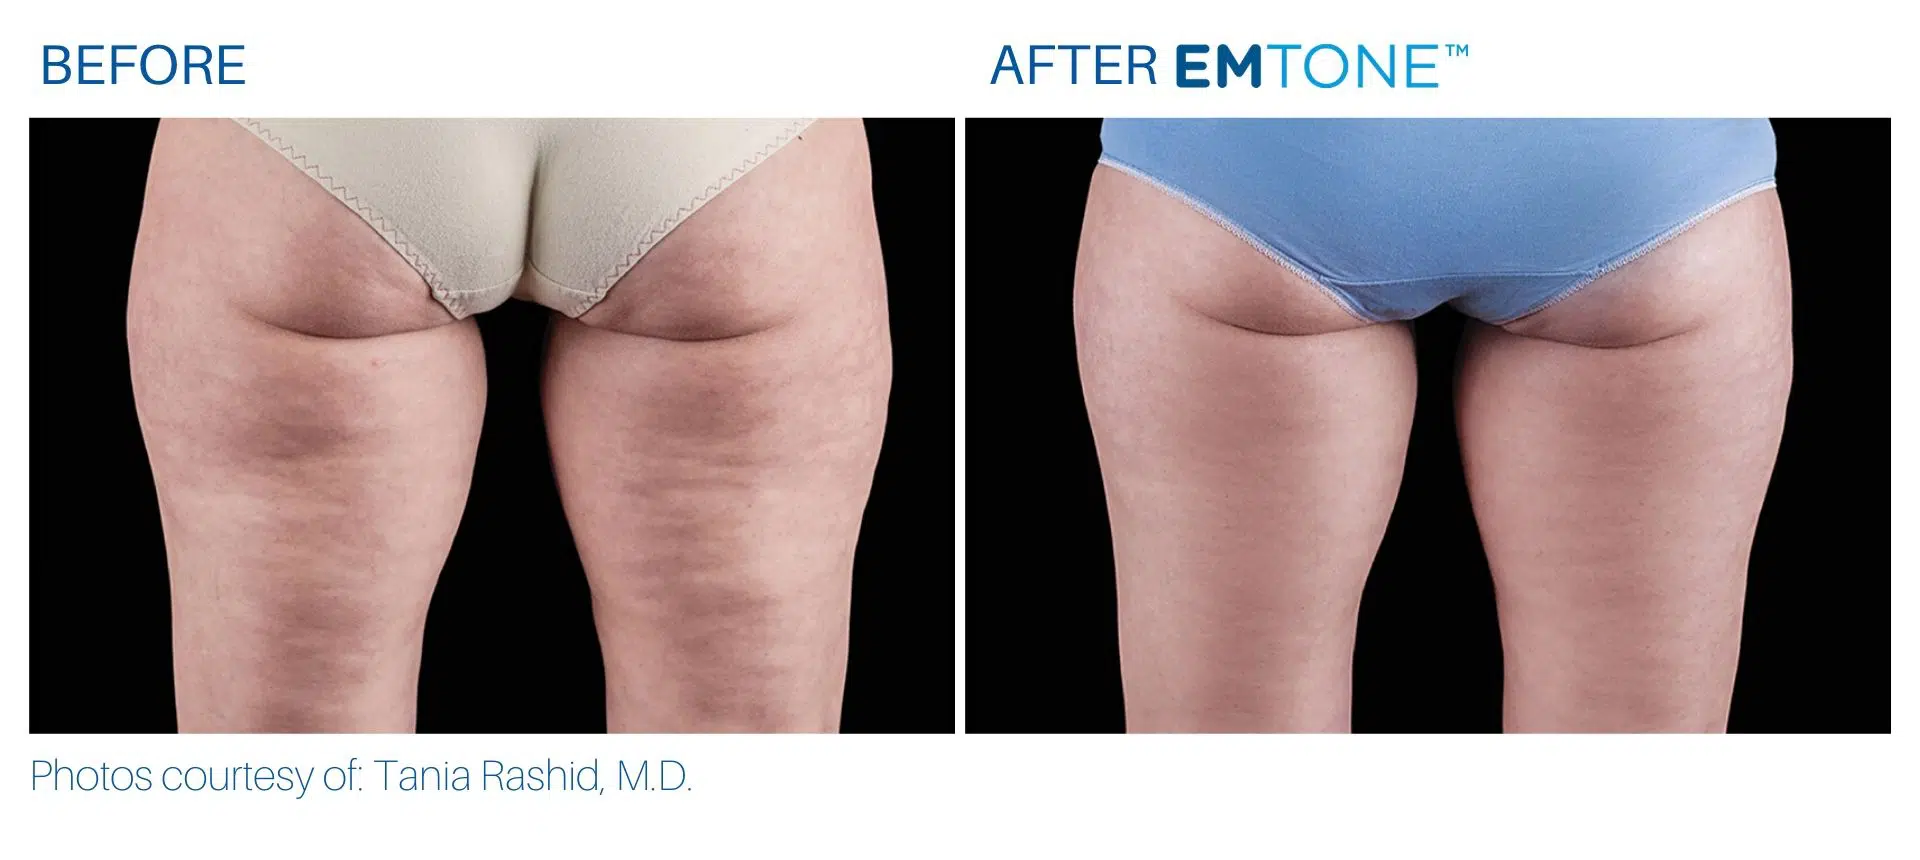 Emtone before and after result thighs BodyMorphMD